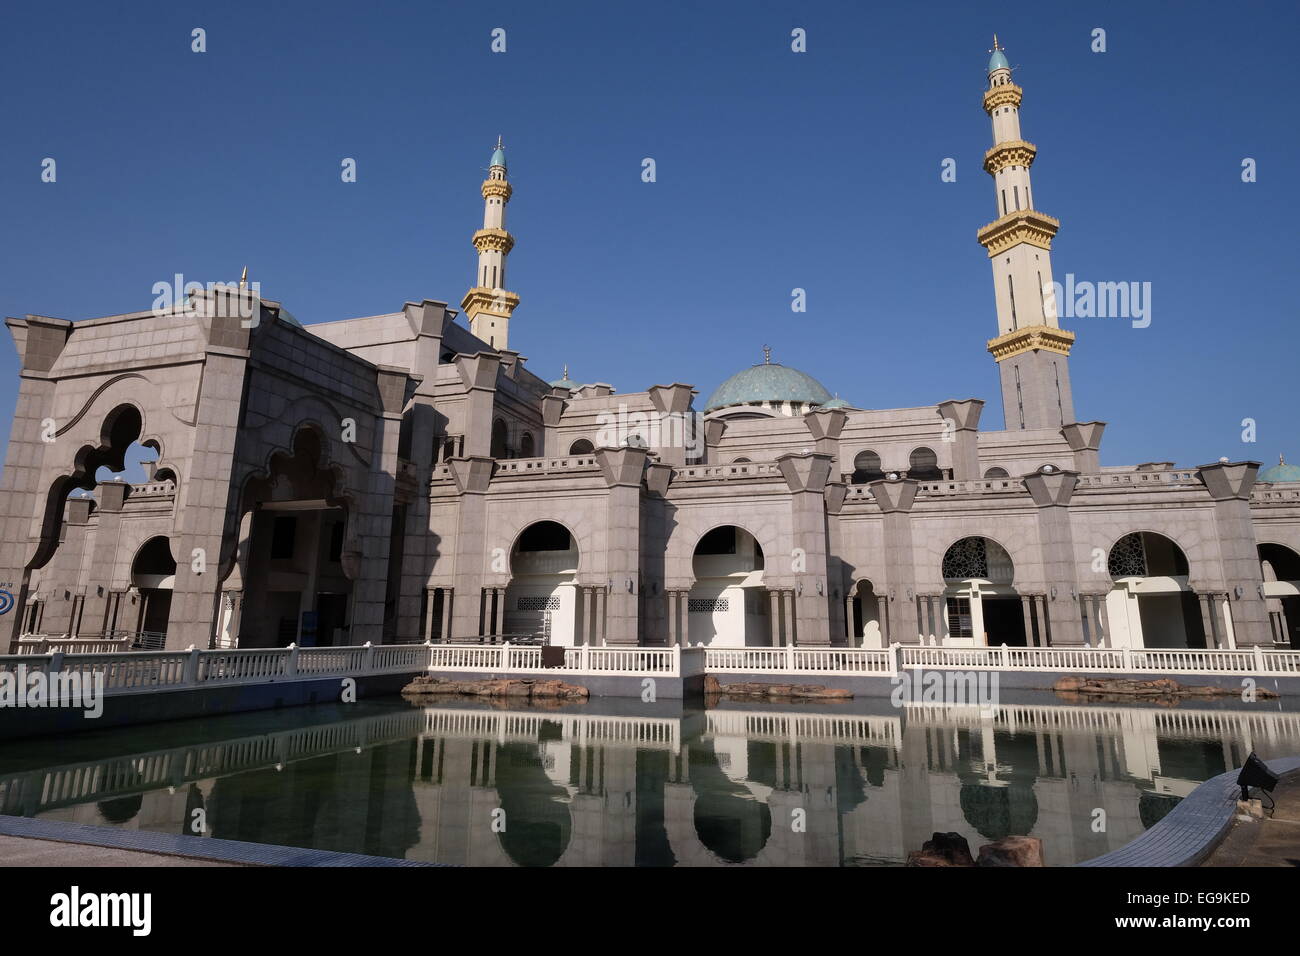 Malaysia, Kuala Lumpur, View of The Federal Territory Mosque against blue sky, pond in foreground Stock Photo